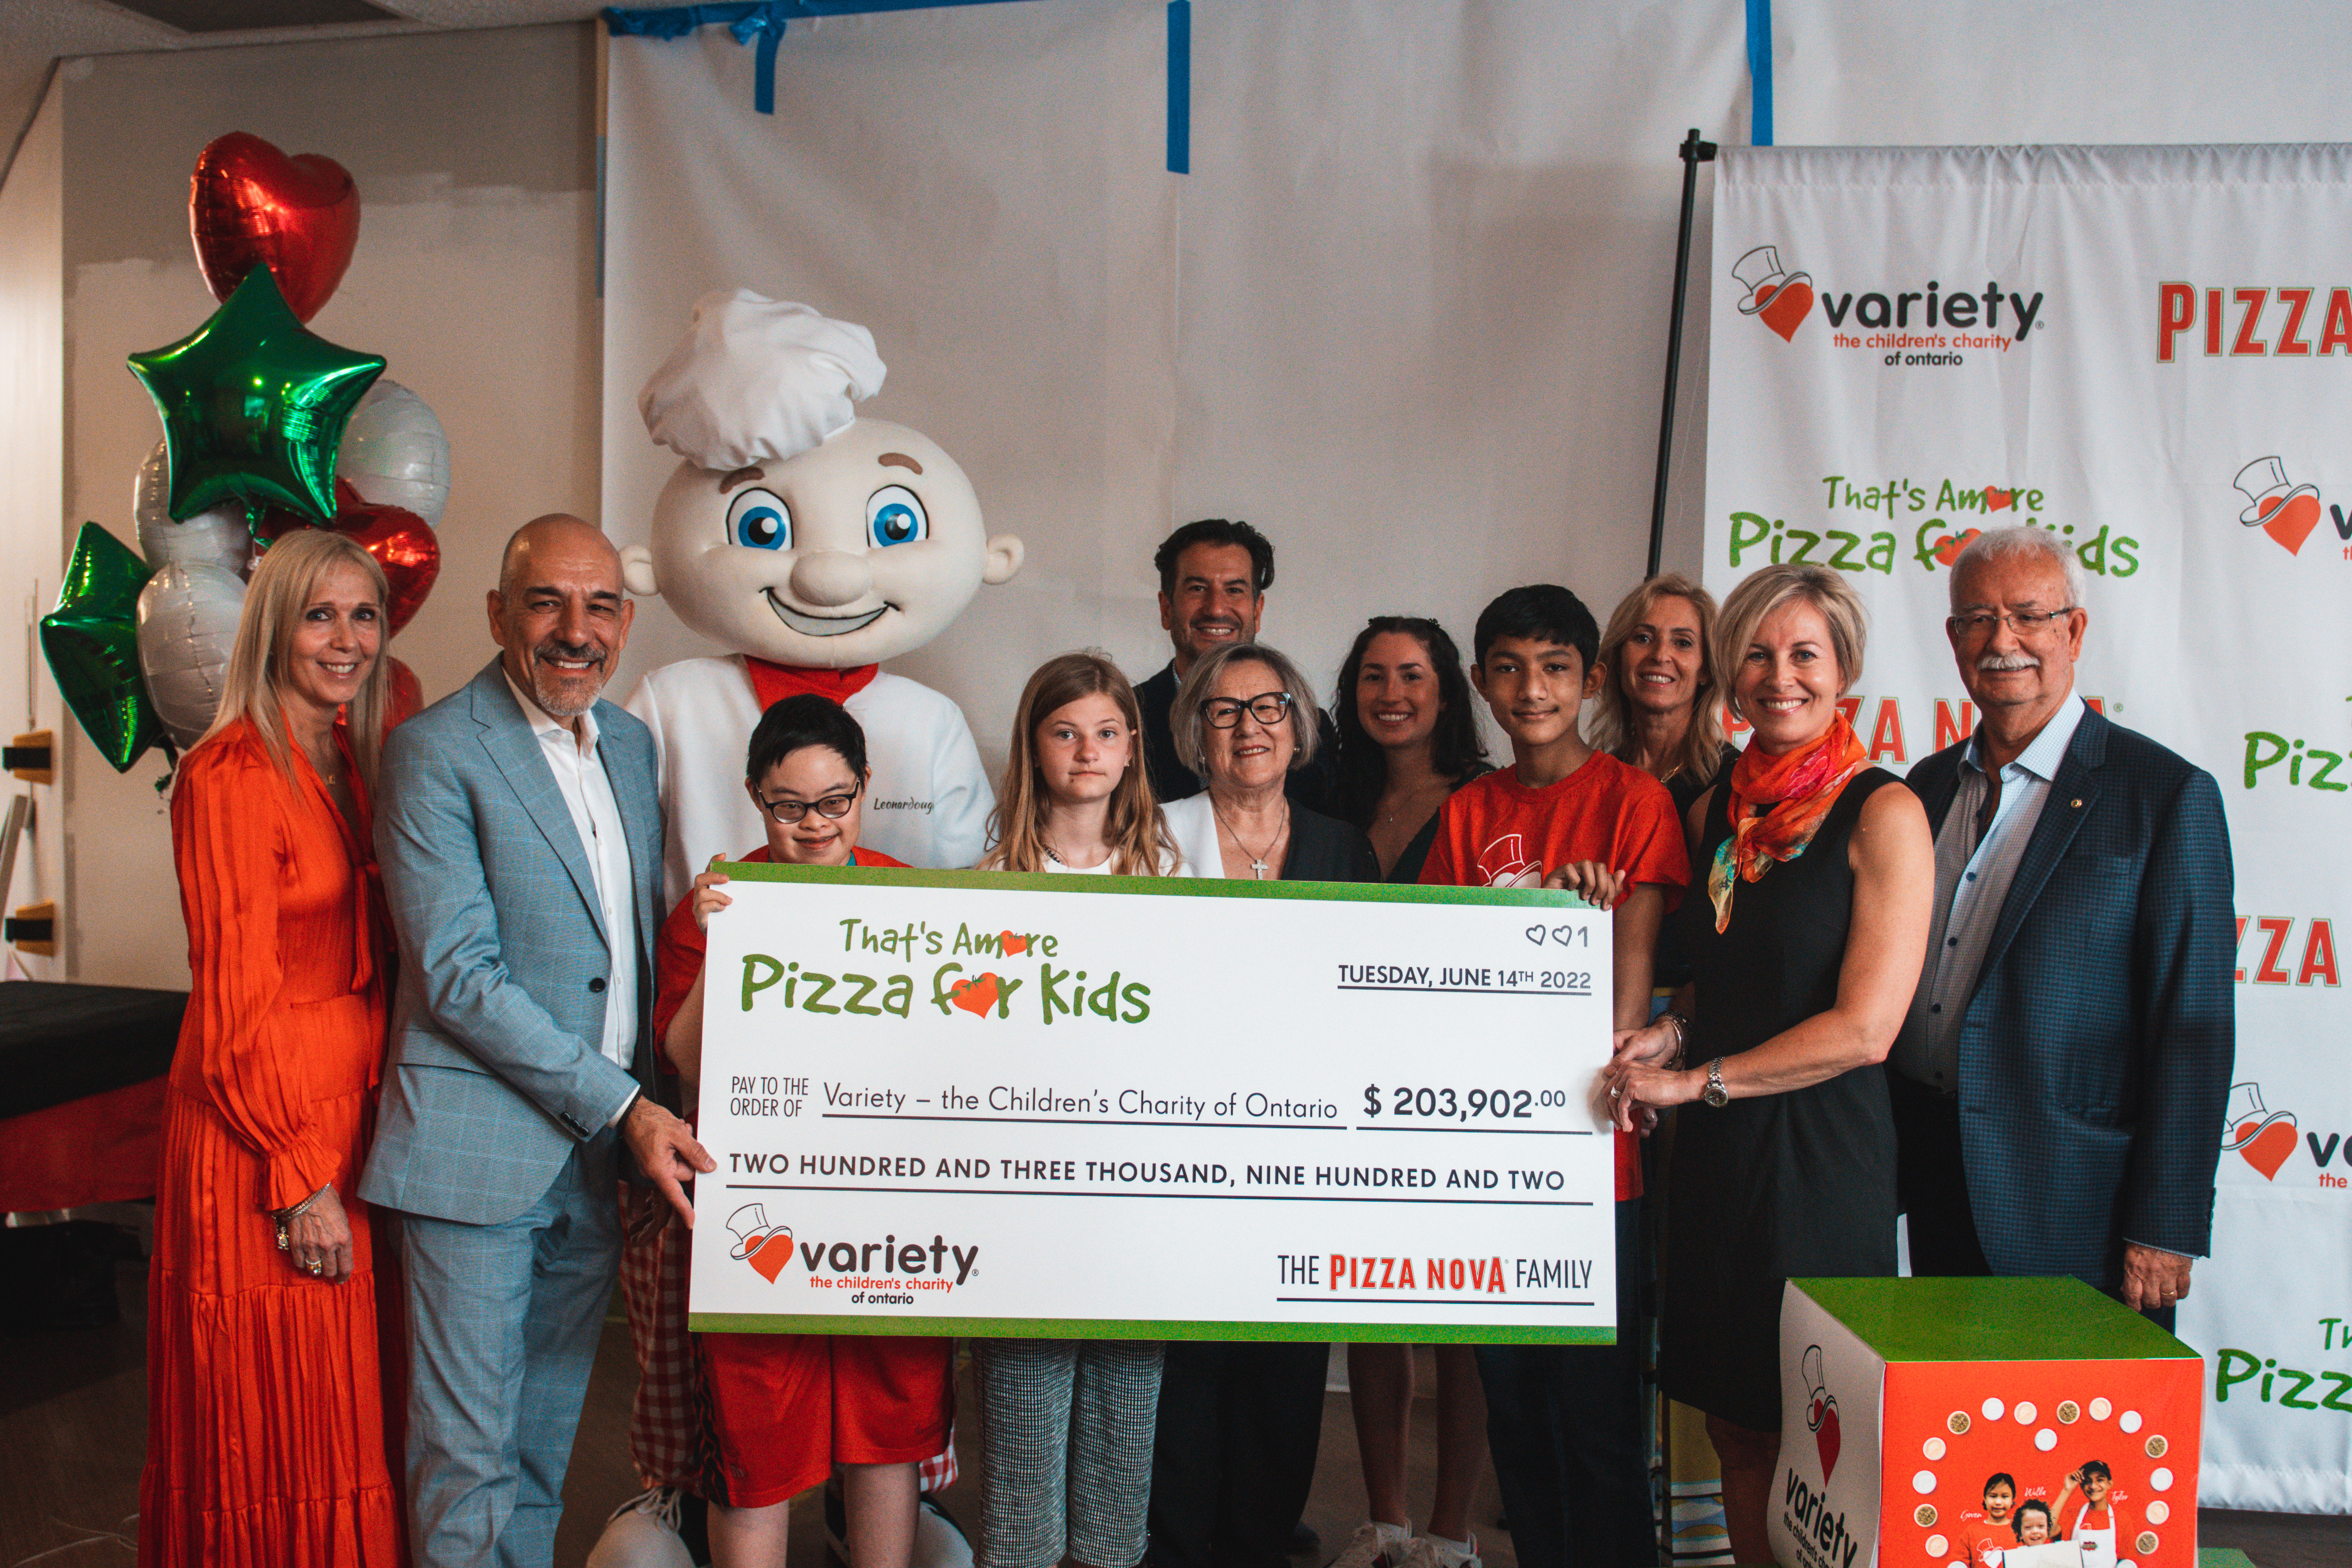 Domenic Primucci, president of Pizza Nova and Sam Primucci, founder, present a cheque for more than $200,000 to Karen Stintz, CEO of Variety - The Children’s Charity of Ontario.